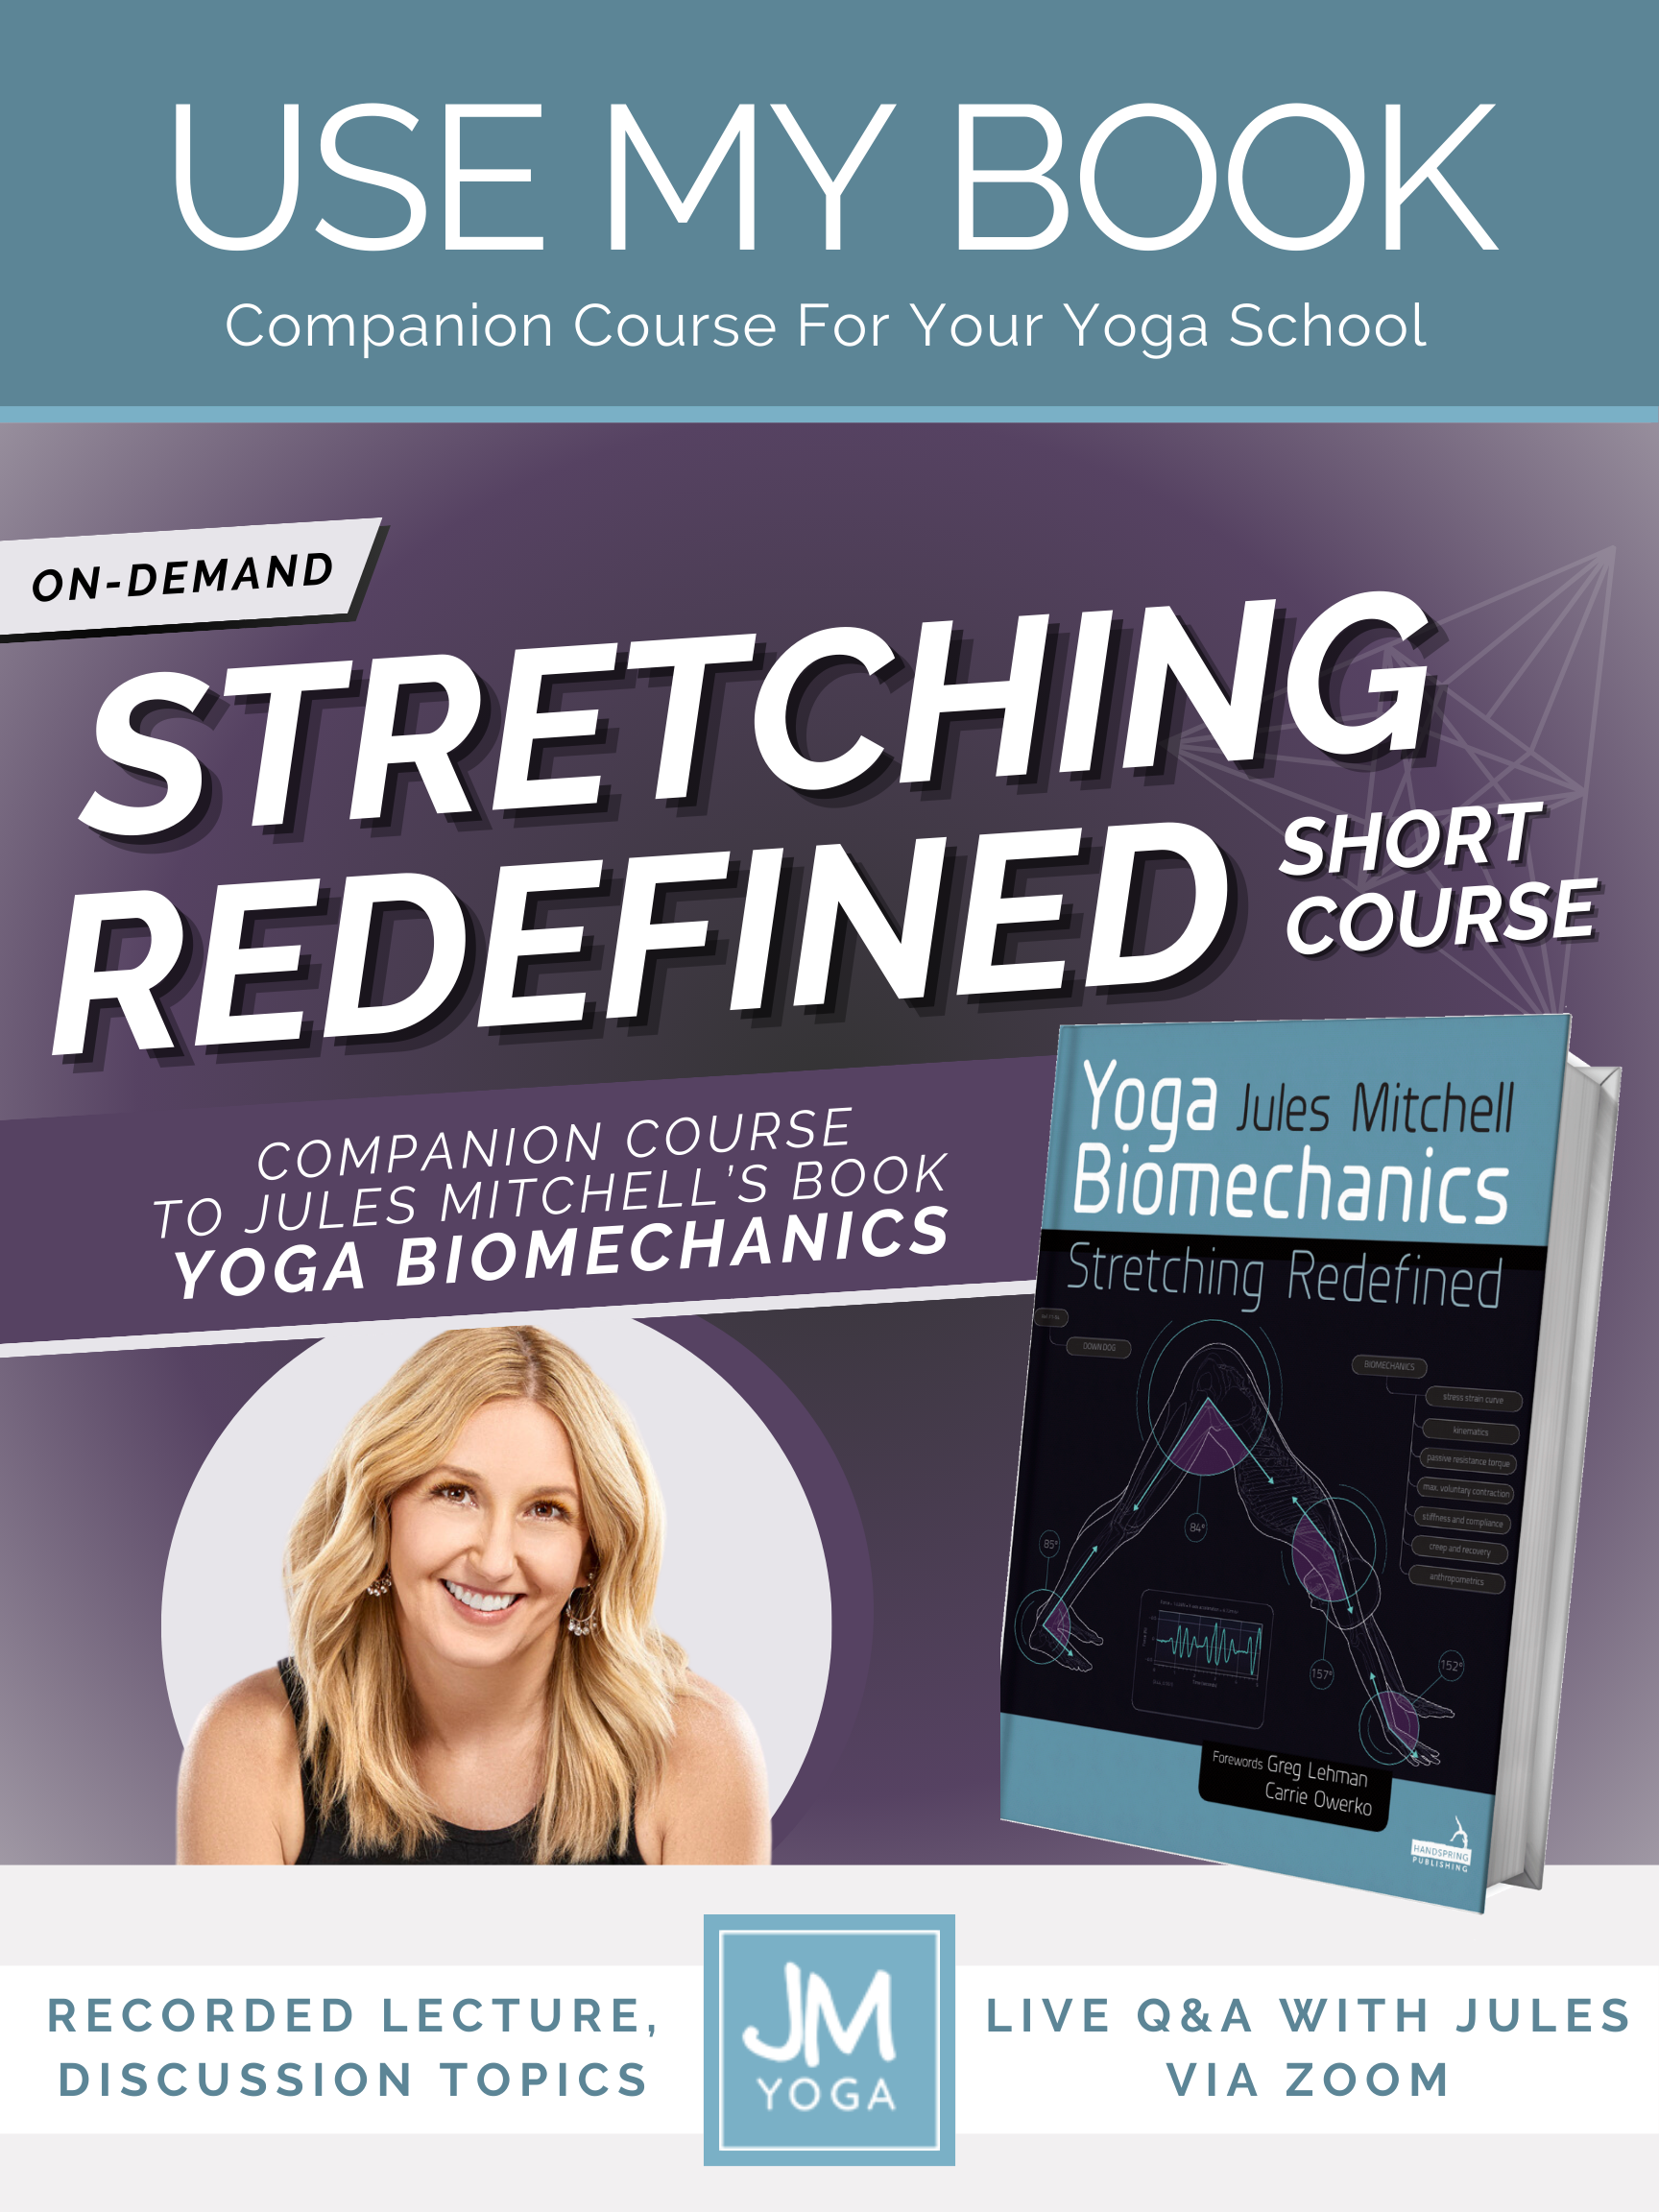 Use my book in your YTT - Companion Course for your Yoga School